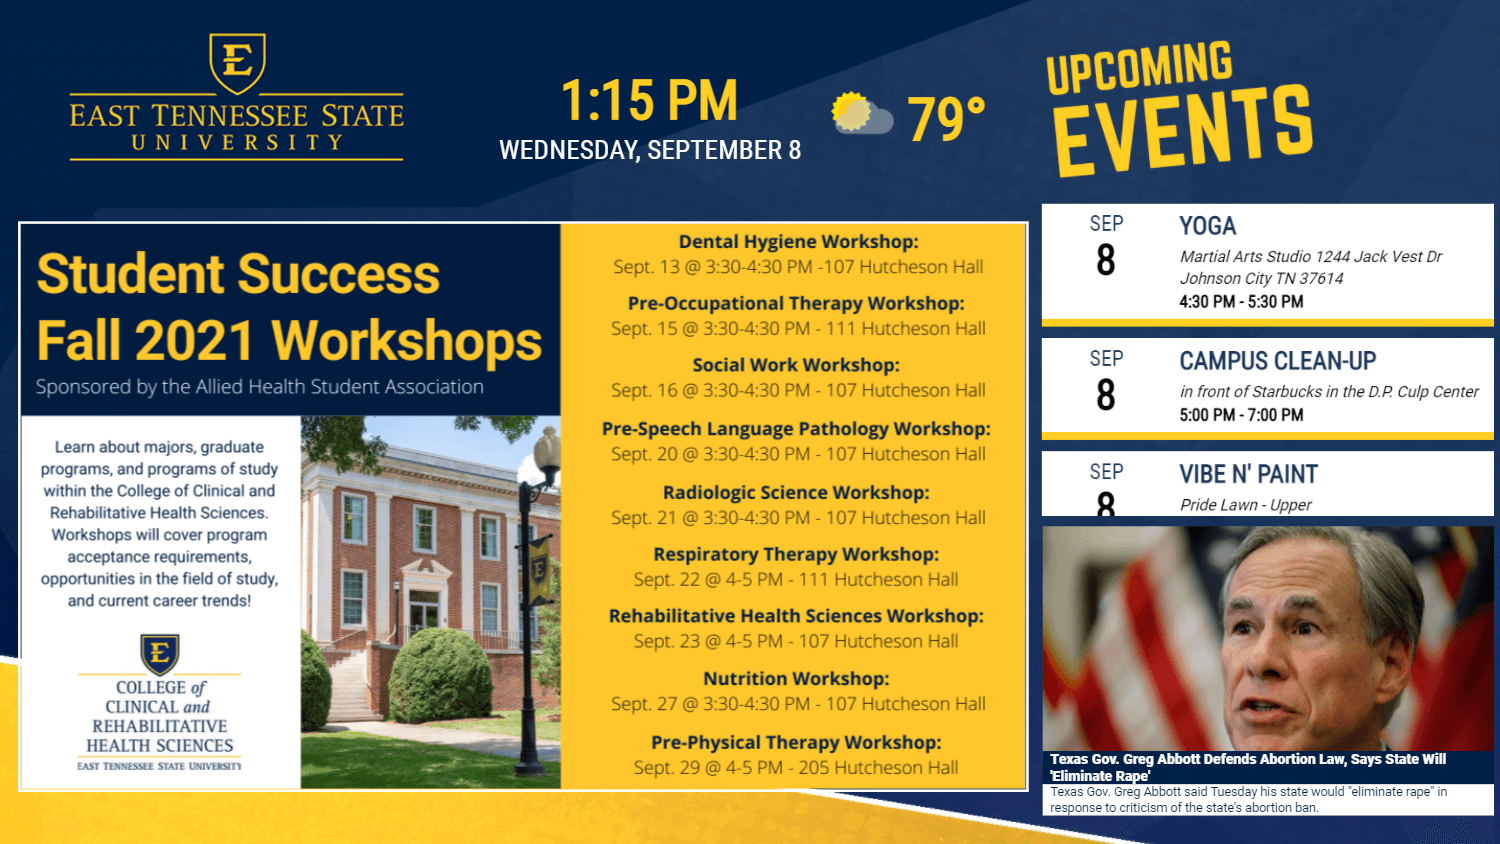 Dark blue and yellow digital signage displaying workshop and event schedules for East Tennessee State University